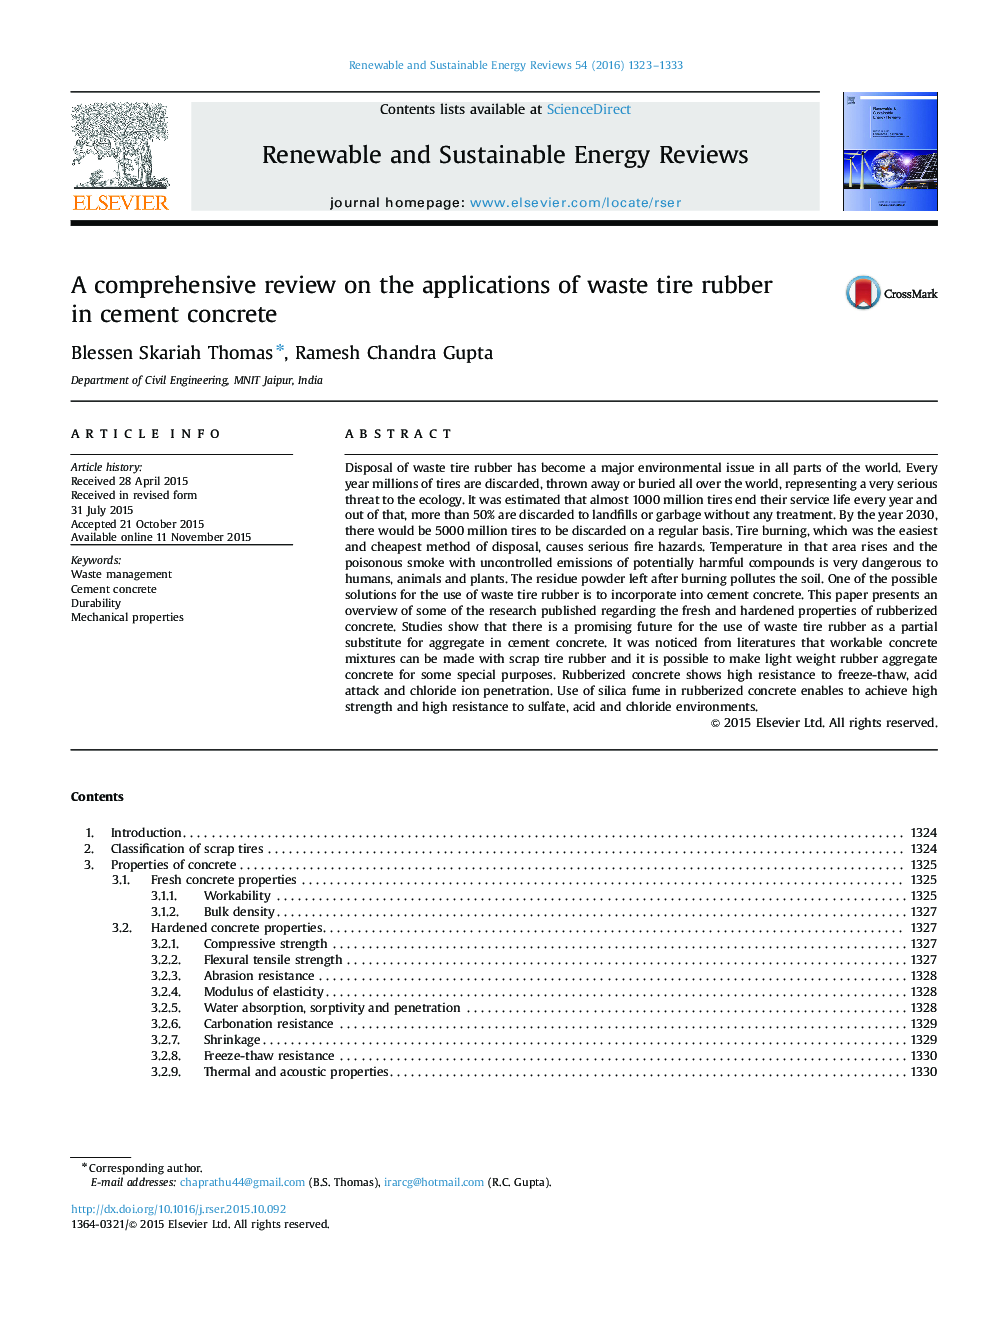 A comprehensive review on the applications of waste tire rubber in cement concrete